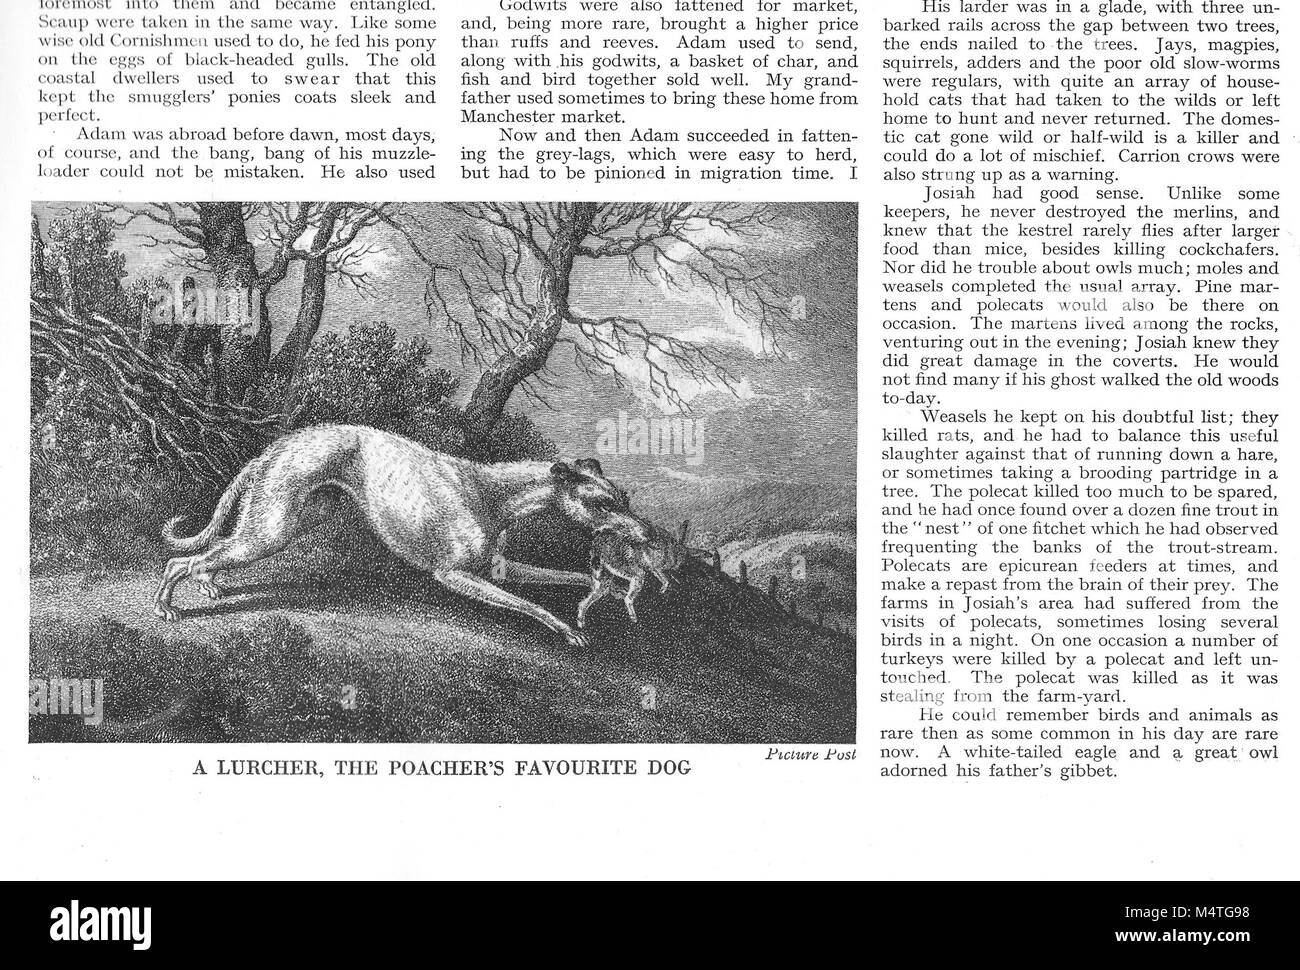 Etching picture drawing in article about Lurcher dog, the poacher's favourite, Country Life magazine UK 1951 Stock Photo